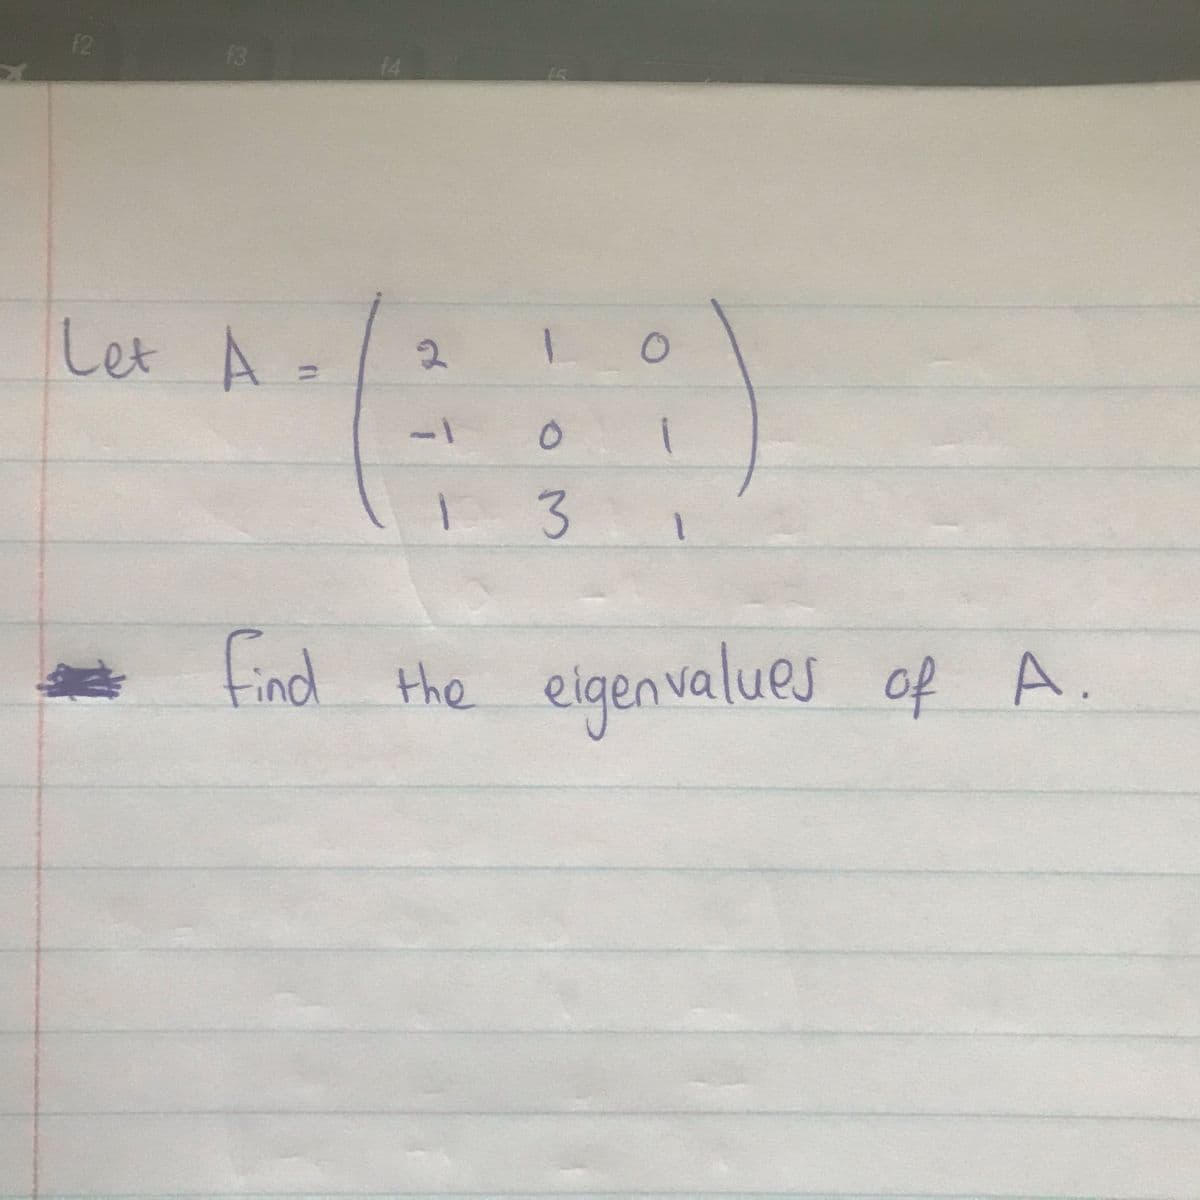 f2
f3
14
Let A =
2.
1-
find the eigenvalues
of A.
OM
